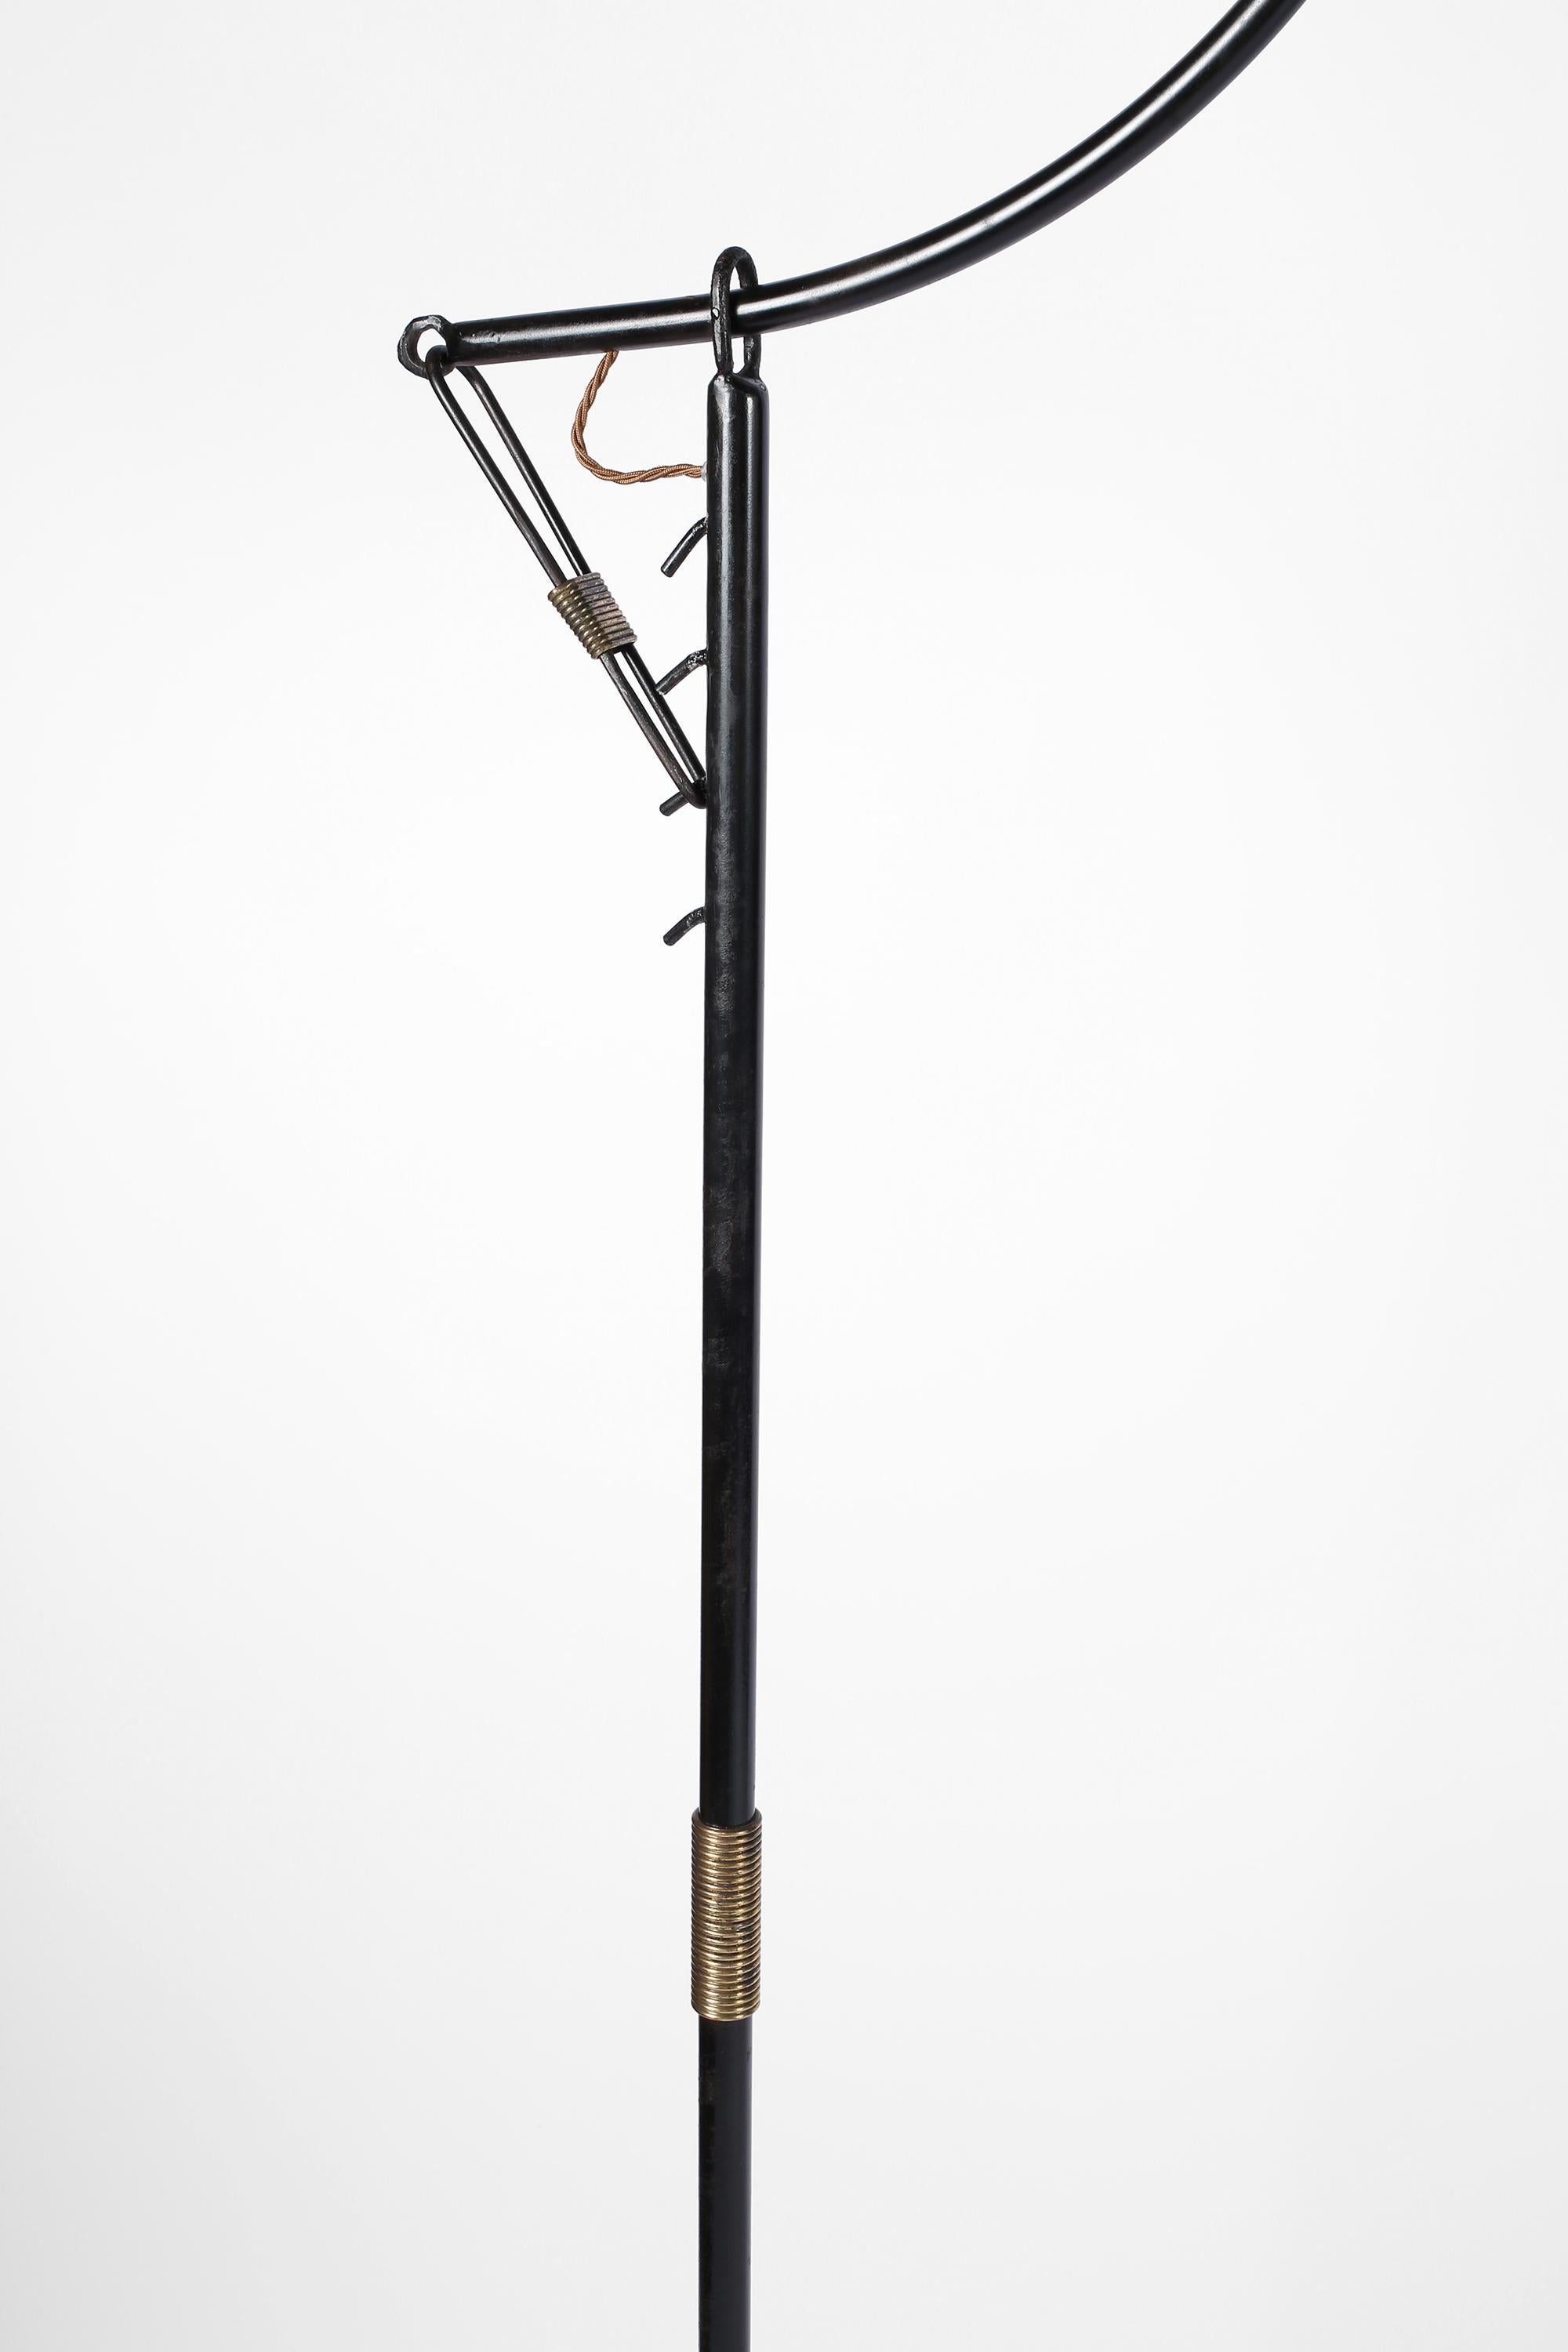 Mid-Century Modern Enamelled Iron Crémaillère Floor Lamp attributed to Jacques Adnet